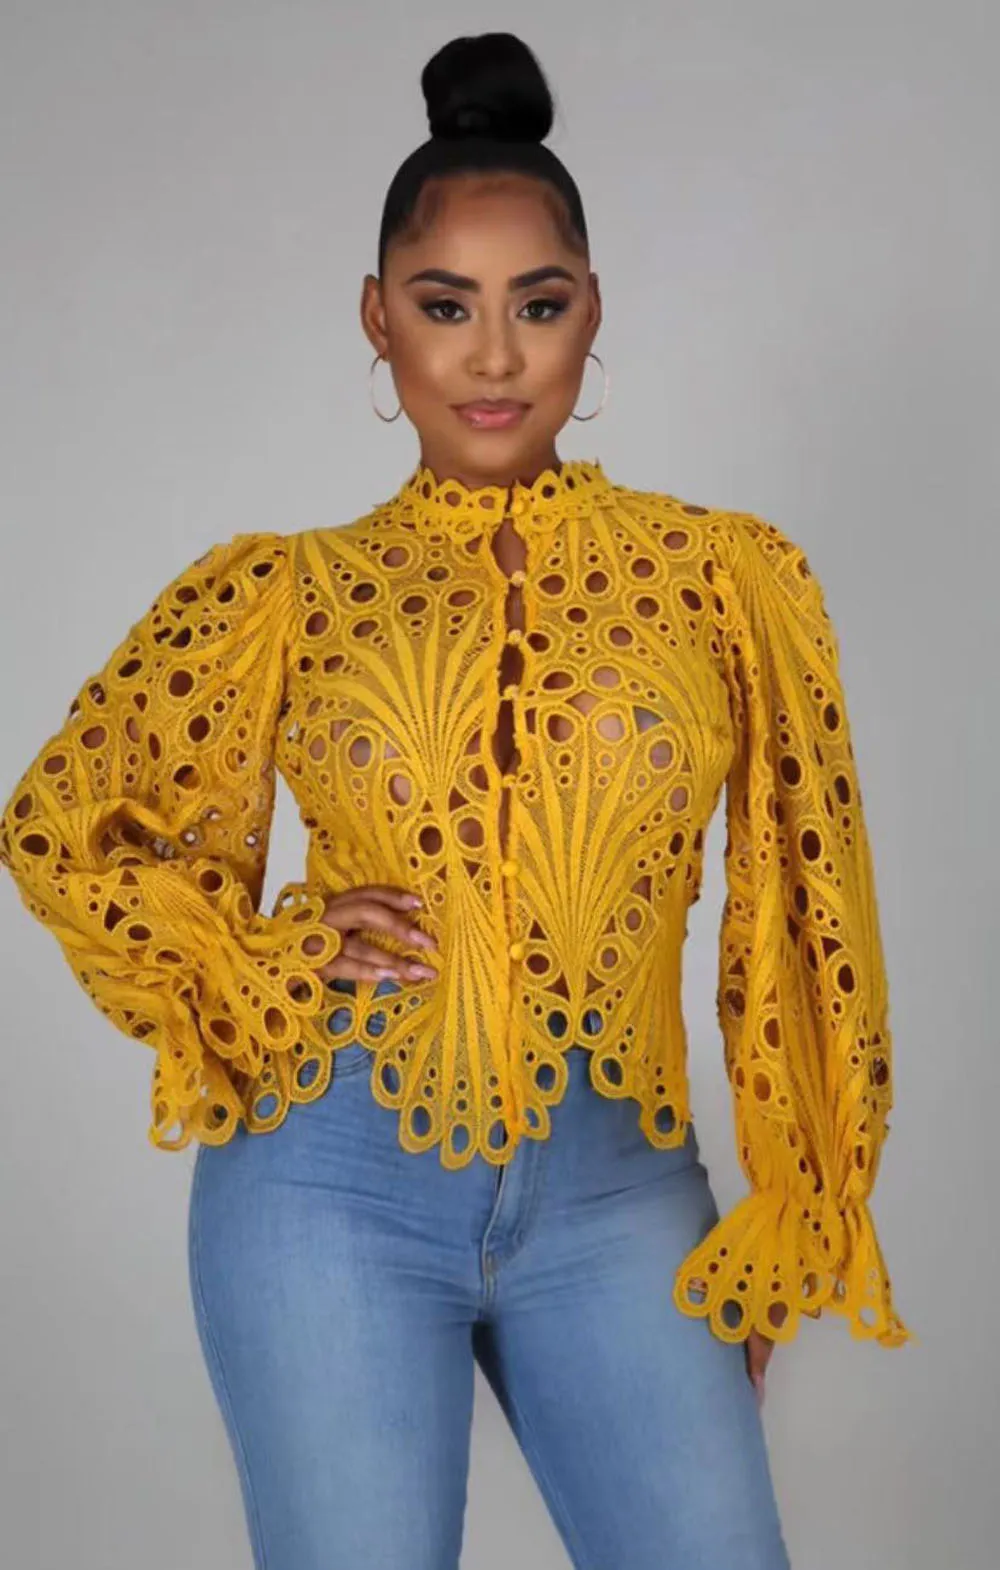 2022 New Elegant Long Sleeve Hollow Out Mesh Lace Shirt Sheer See Through Top Blouse Clothing Dashiki African Shirts For Women